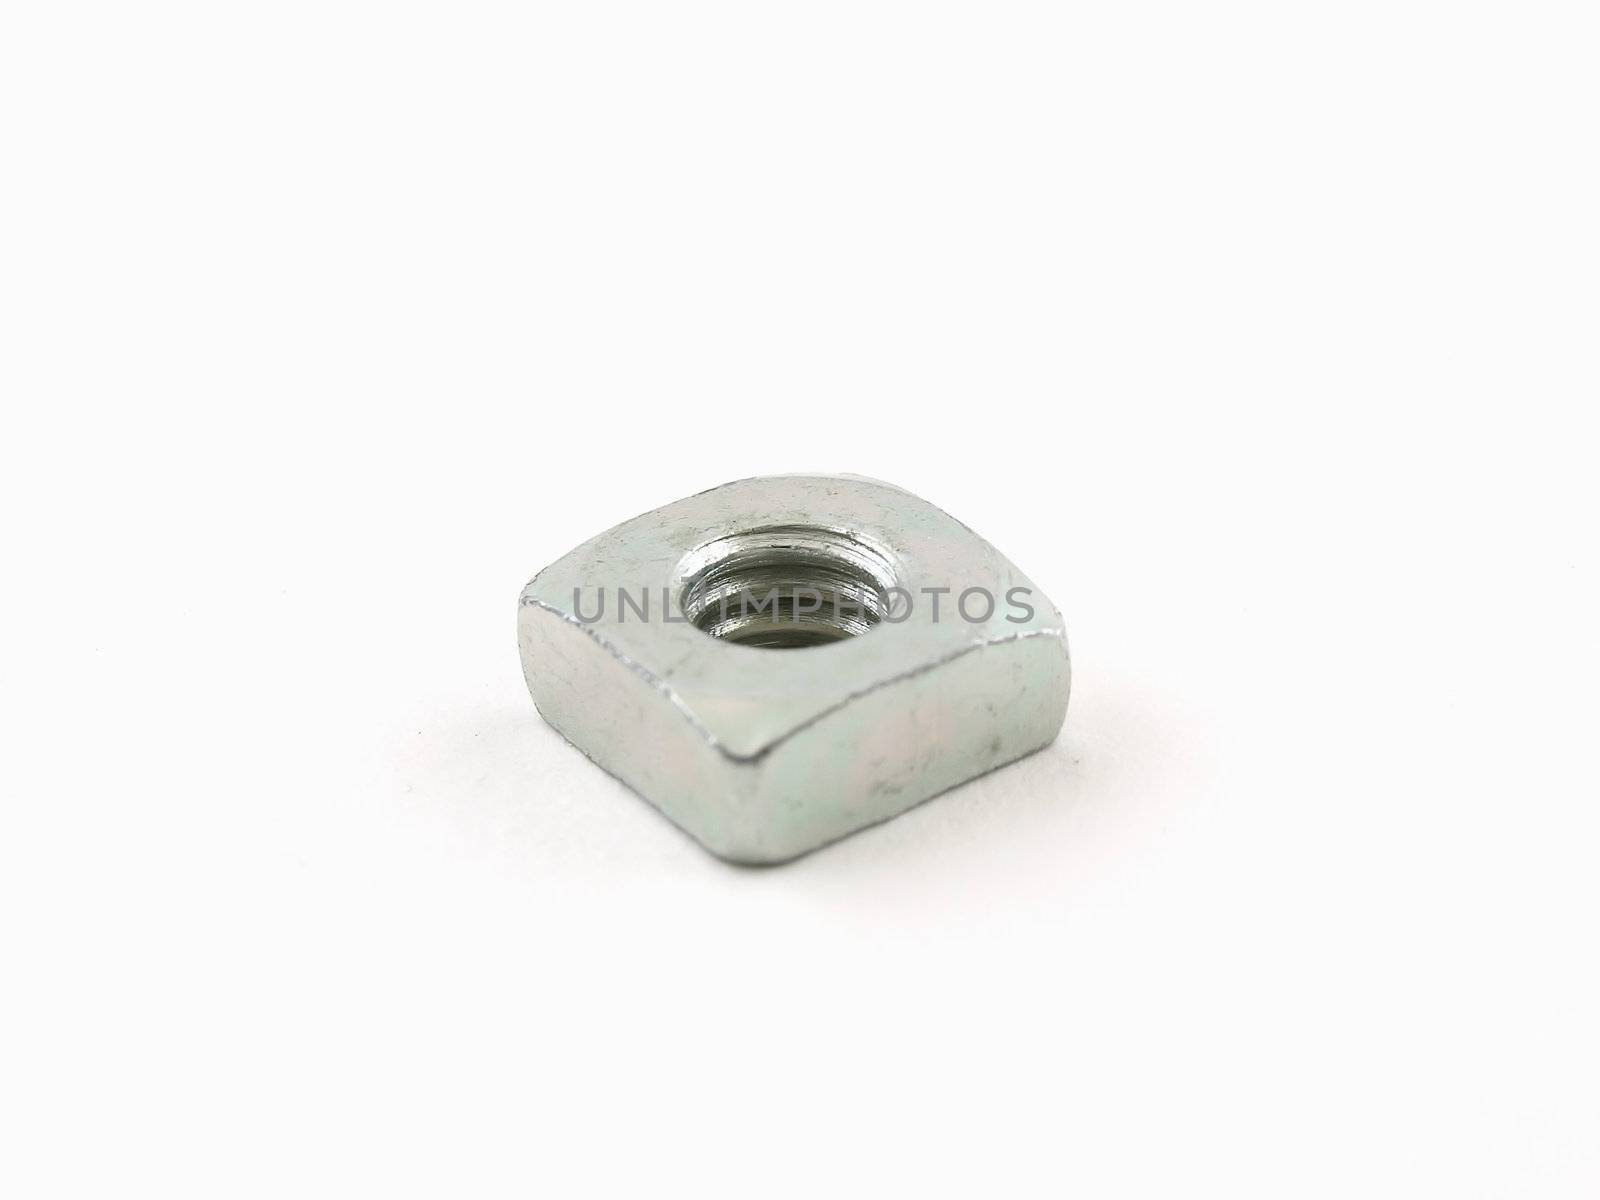 A single steel nut isolated on a white background.